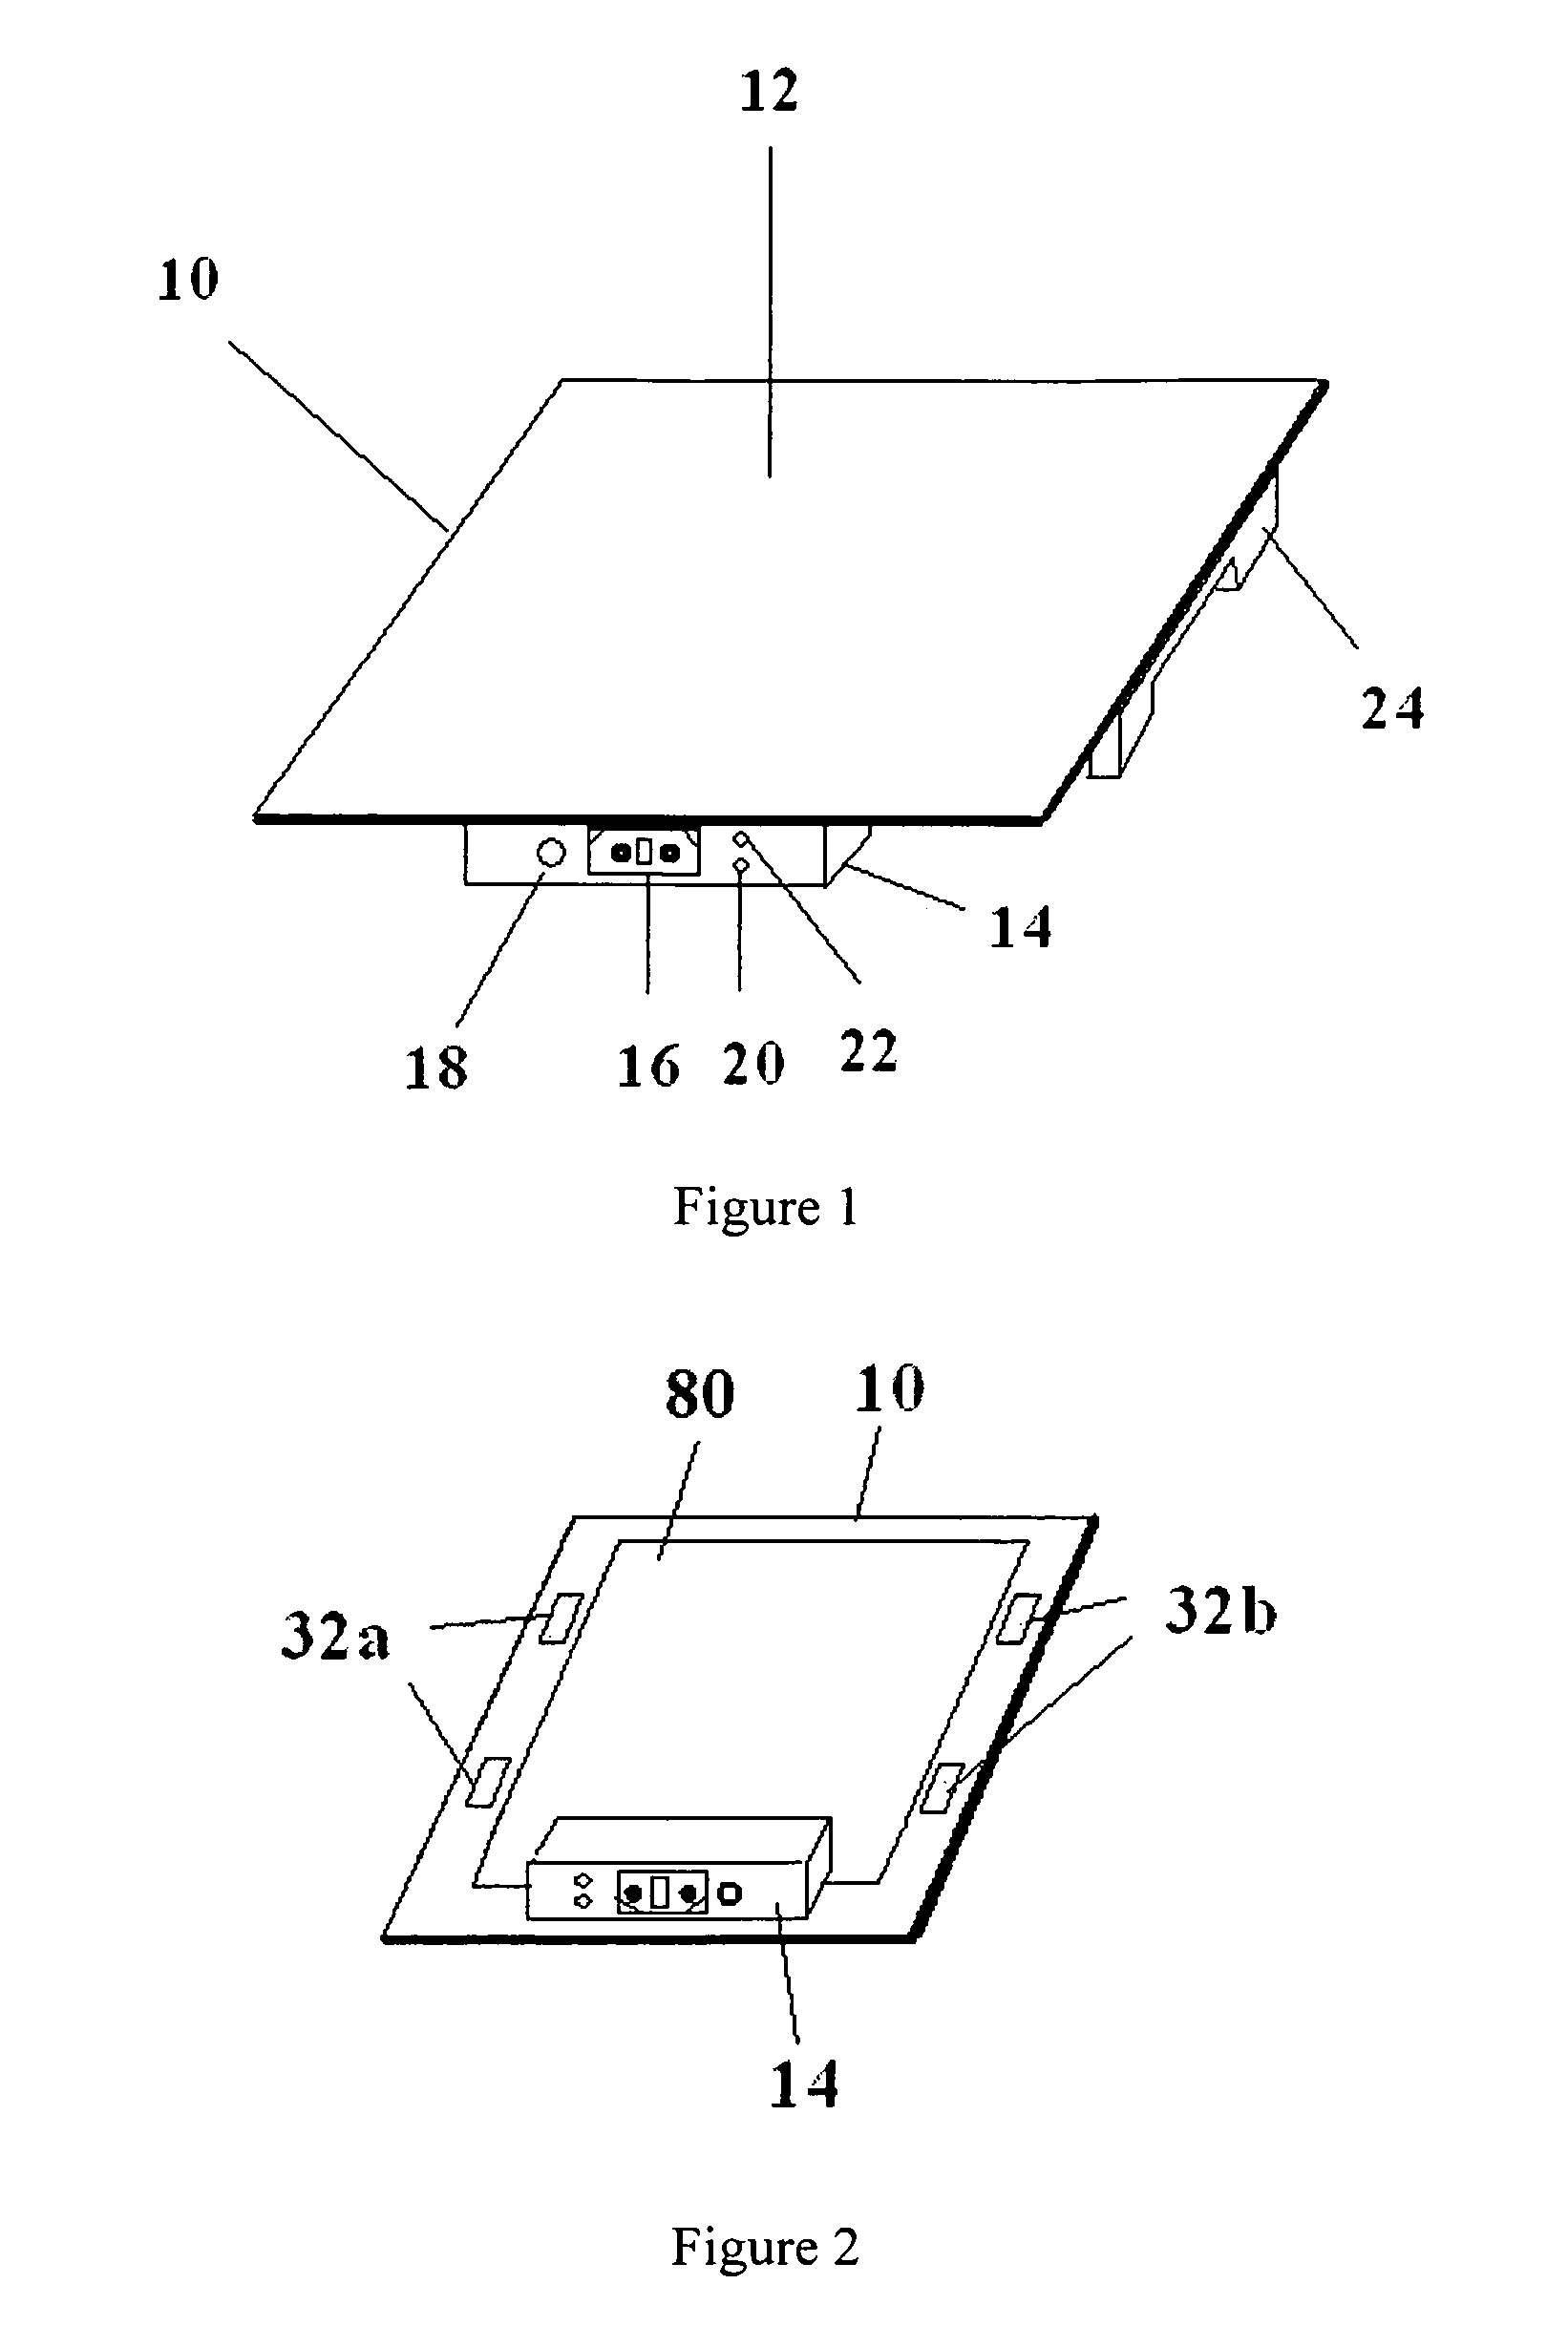 System for heated food delivery and serving